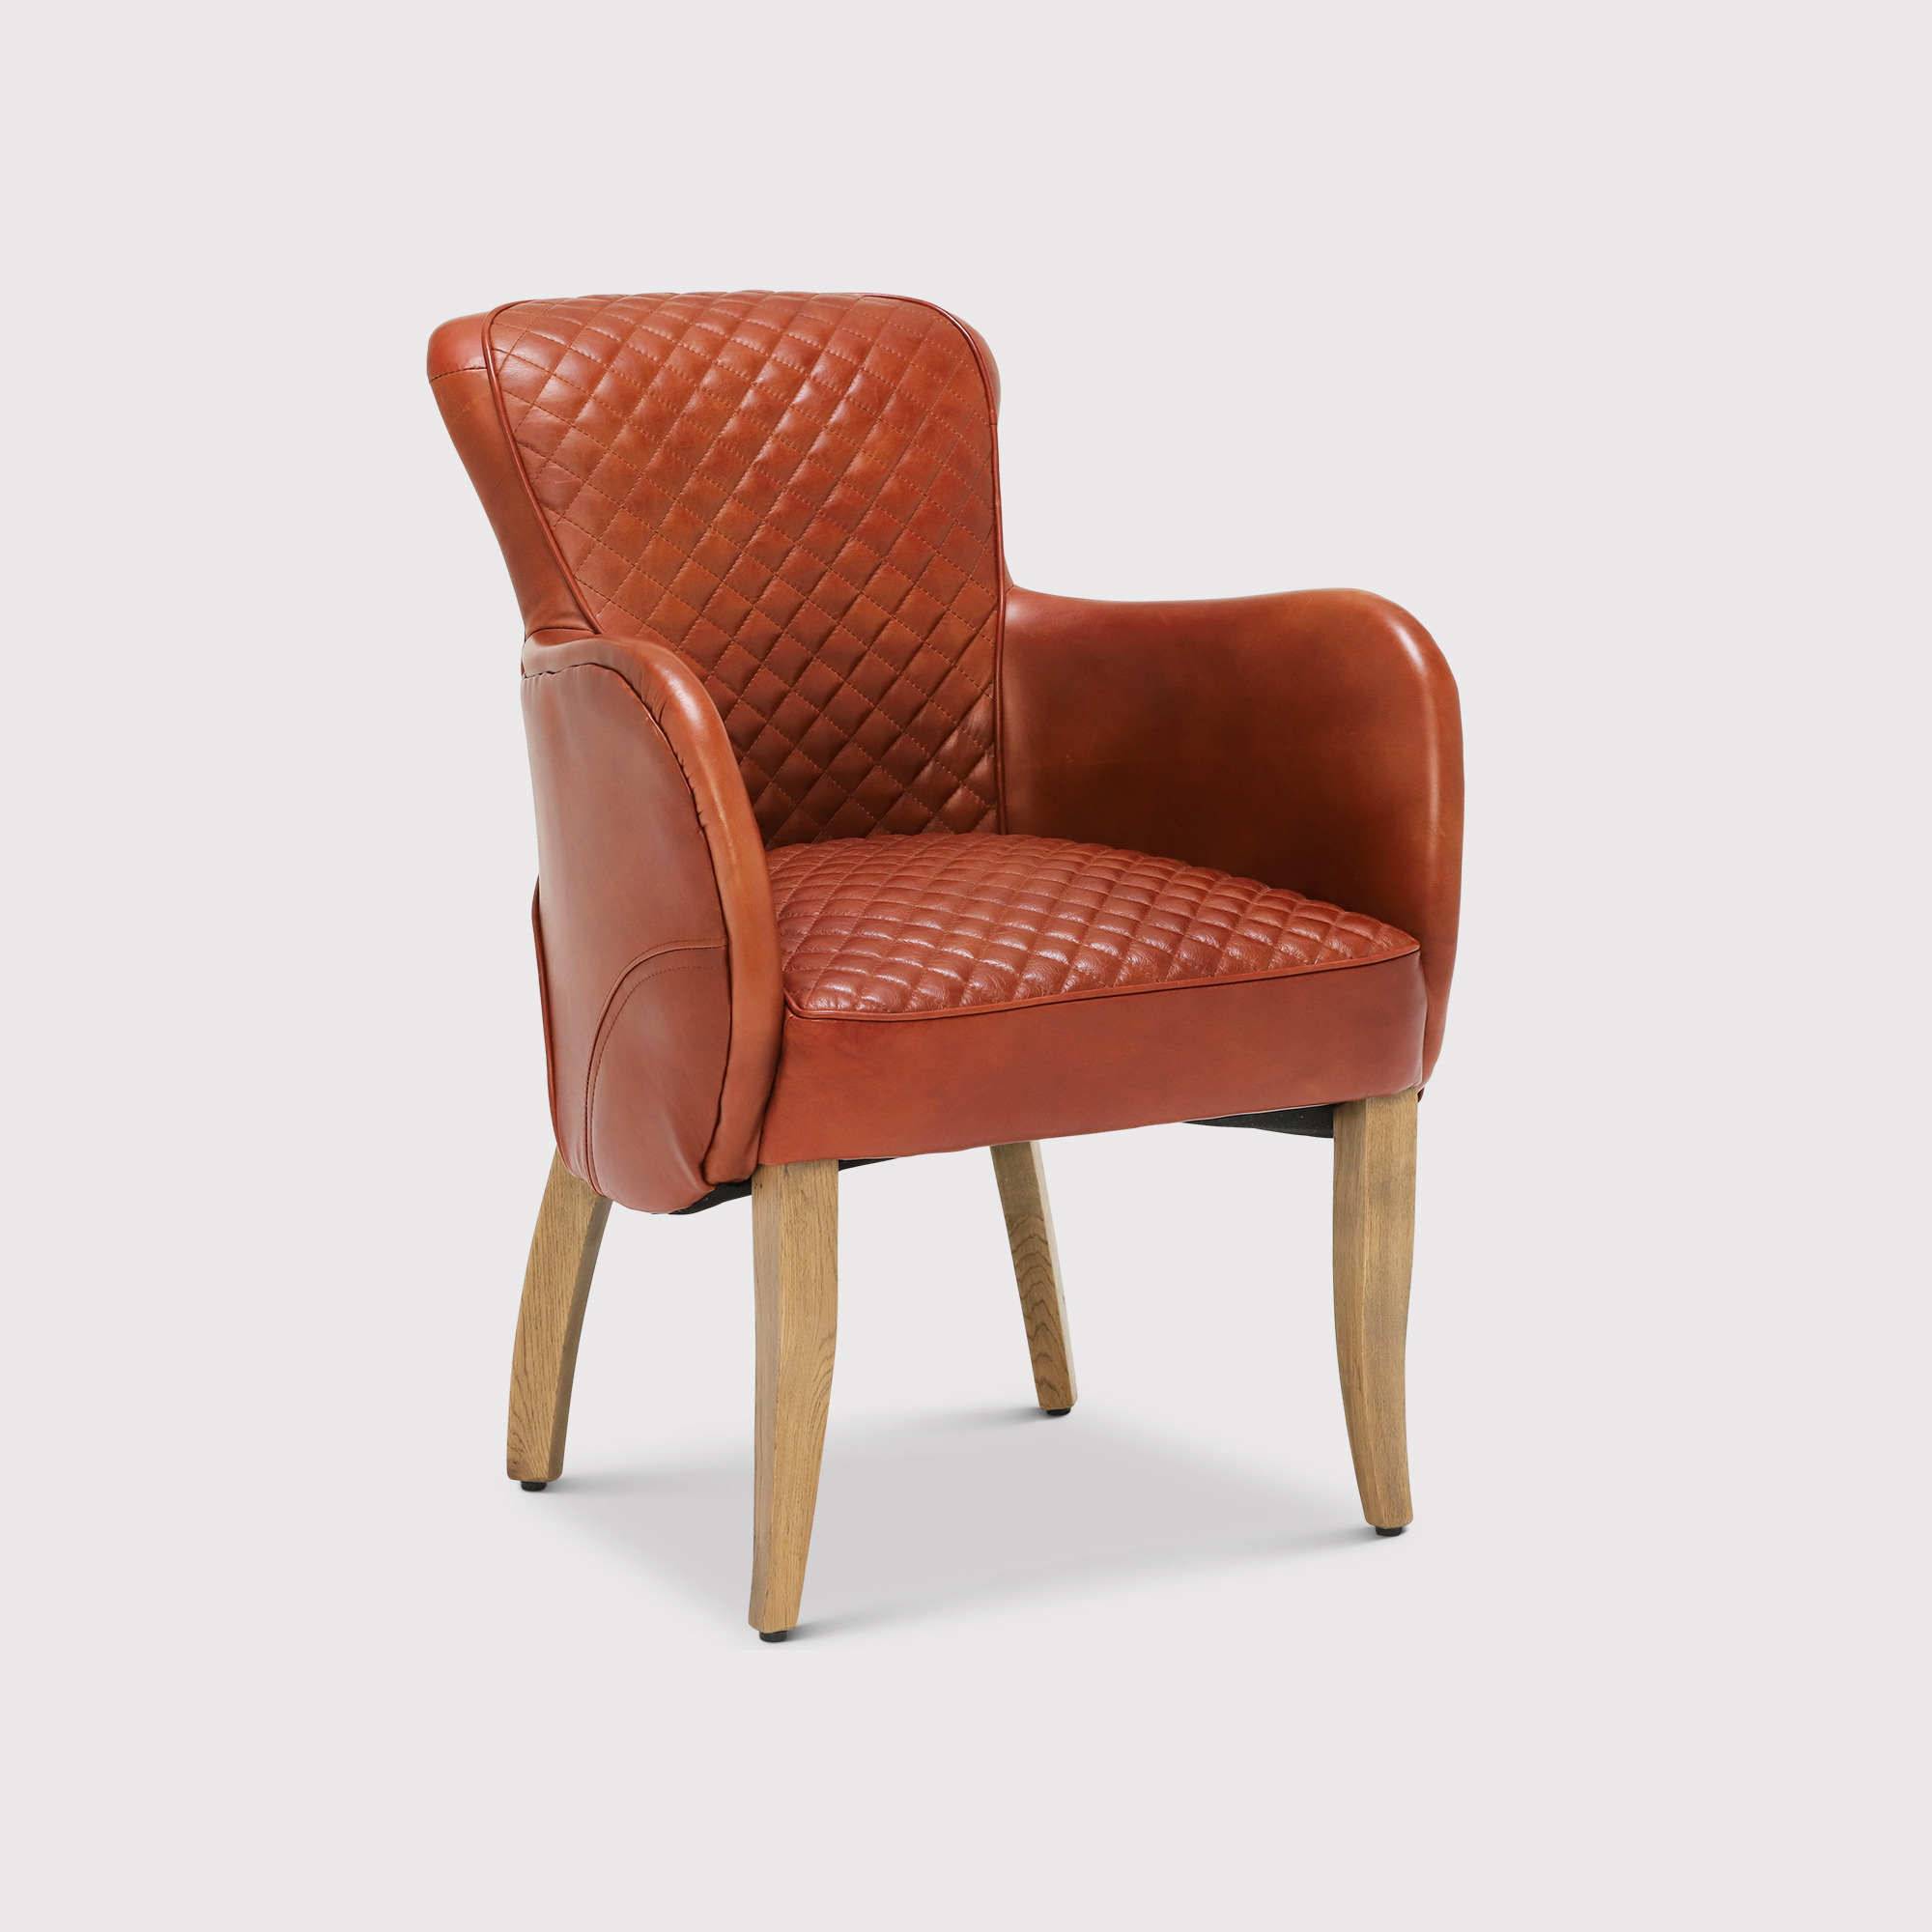 Timothy Oulton Side Saddle Dining Dining Chair With Arms, Red Leather - Barker & Stonehouse - image 1